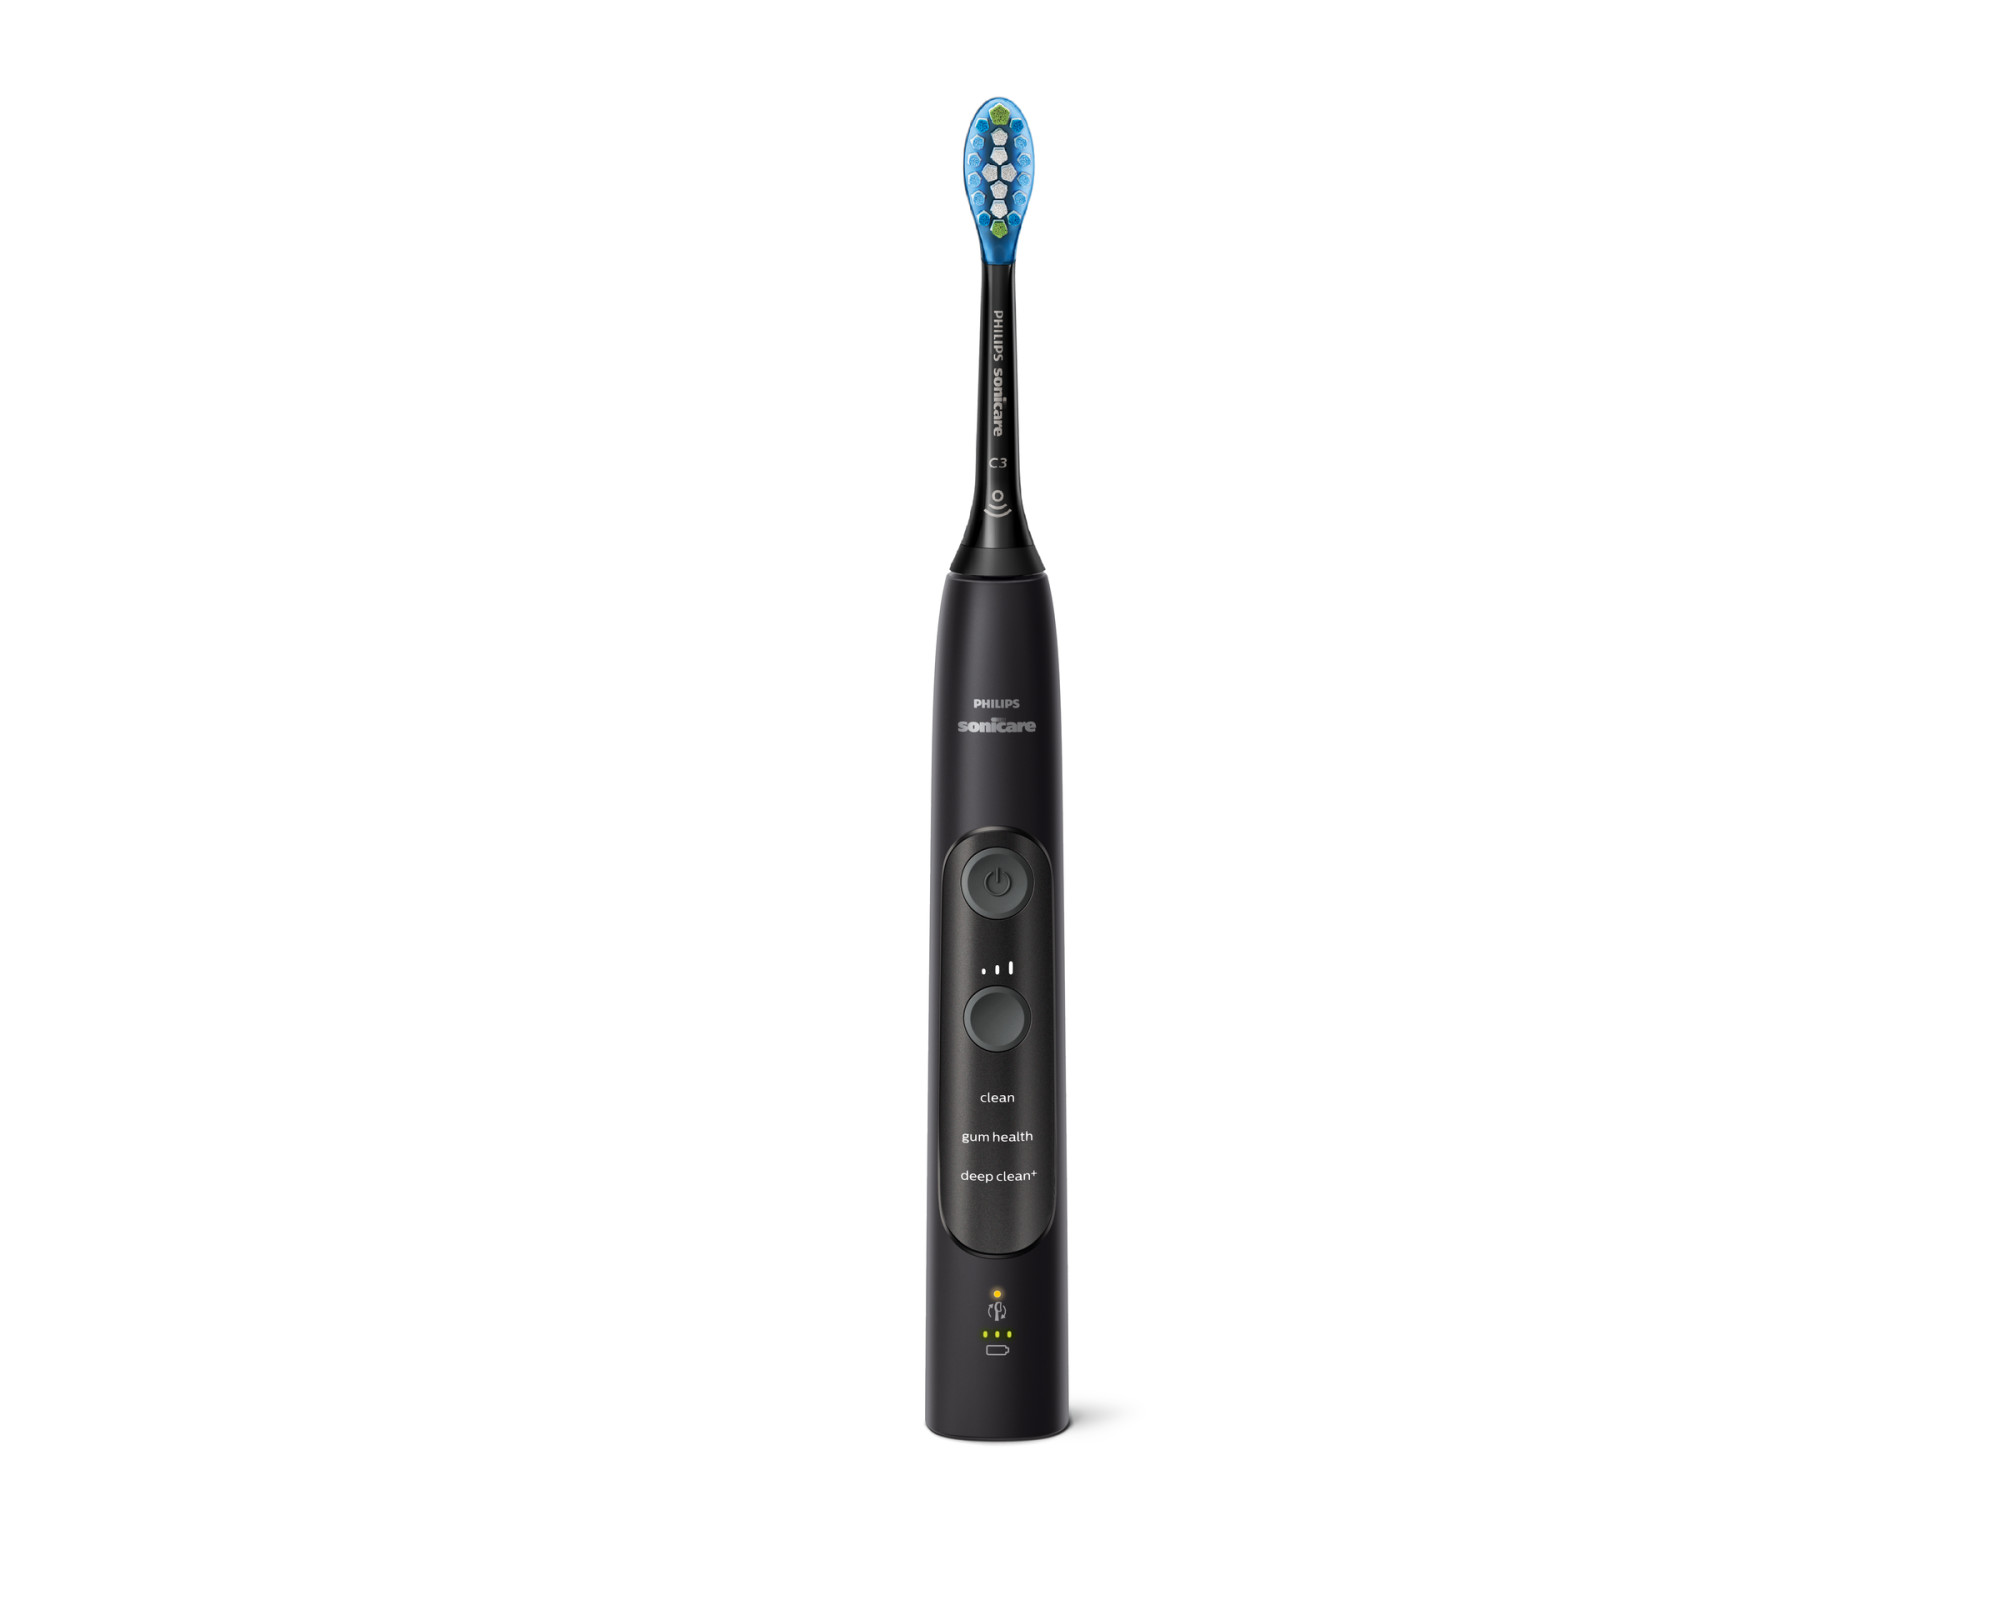 Philips Sonicare ExpertClean 7300, Rechargeable Electric Toothbrush, Black HX9610/17 - image 10 of 19